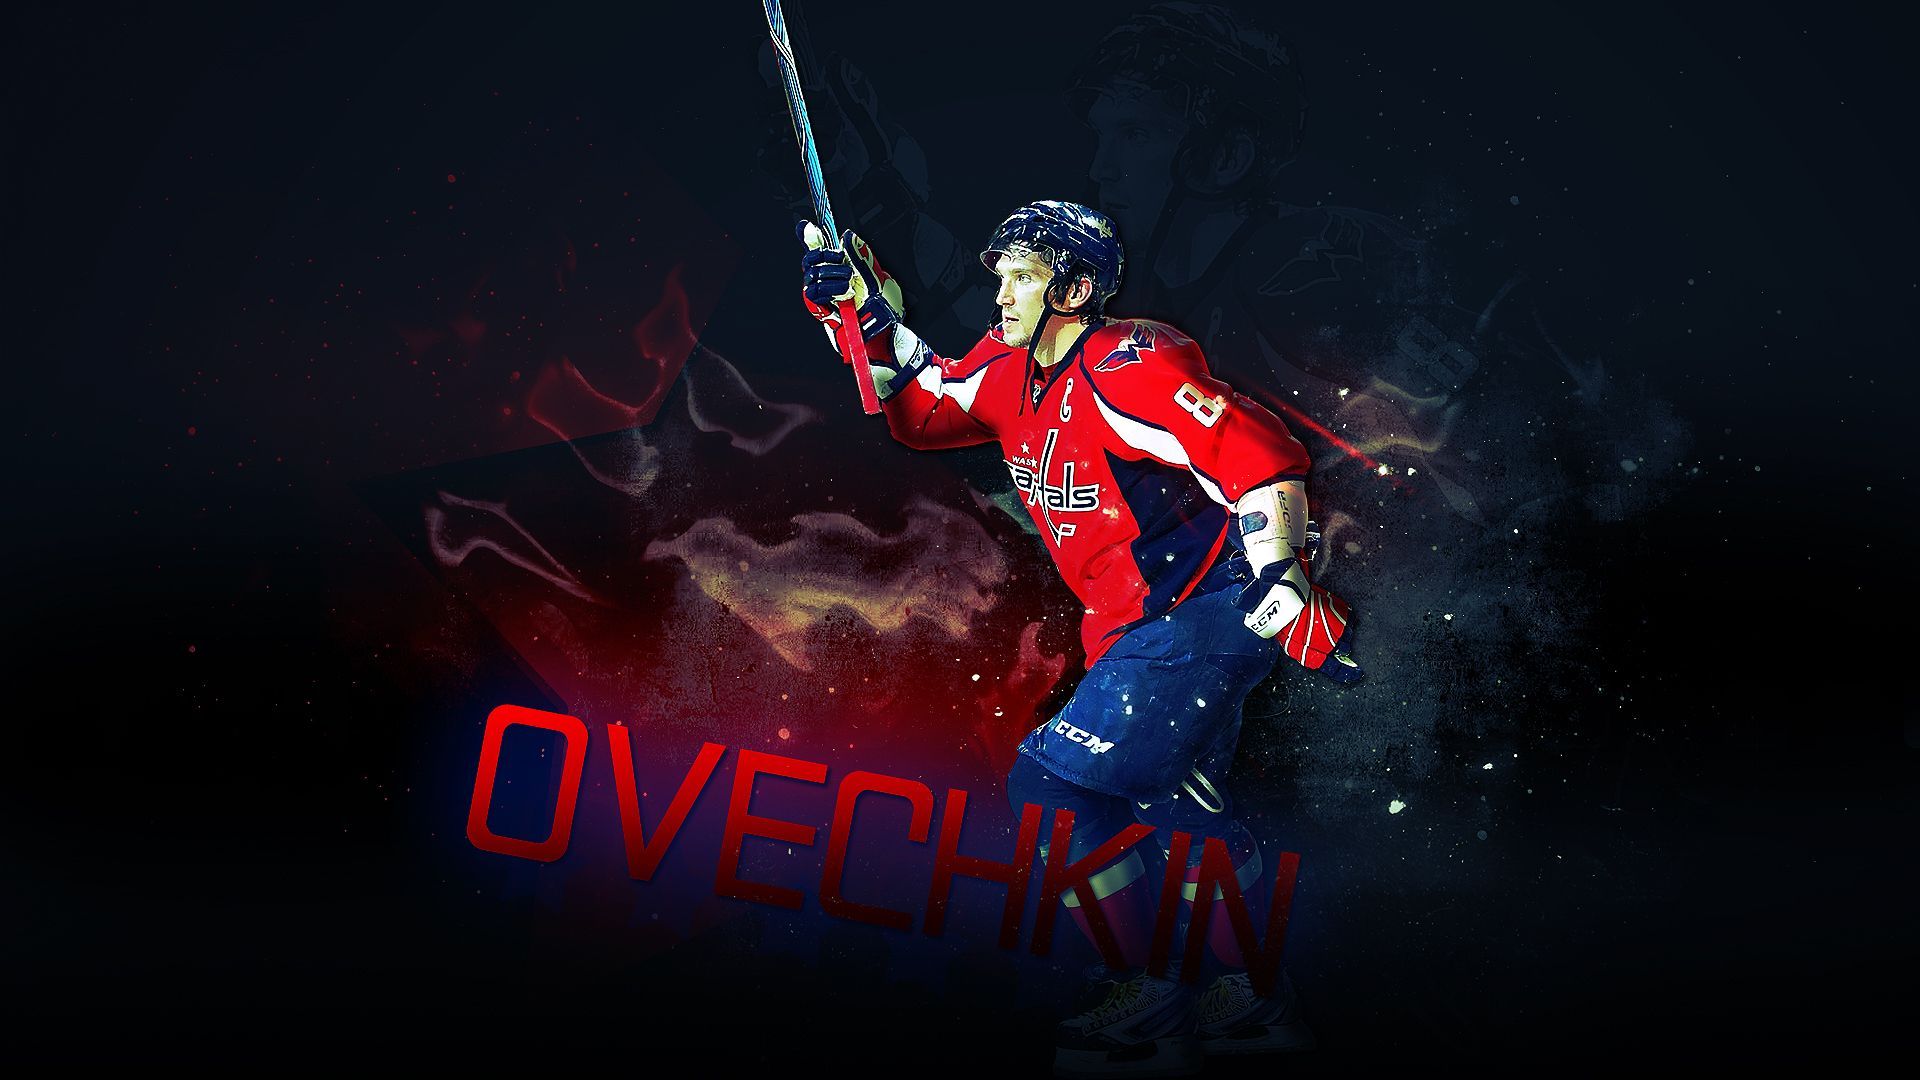 Famous Hockey player Alexander Ovechkin wallpapers and images ...